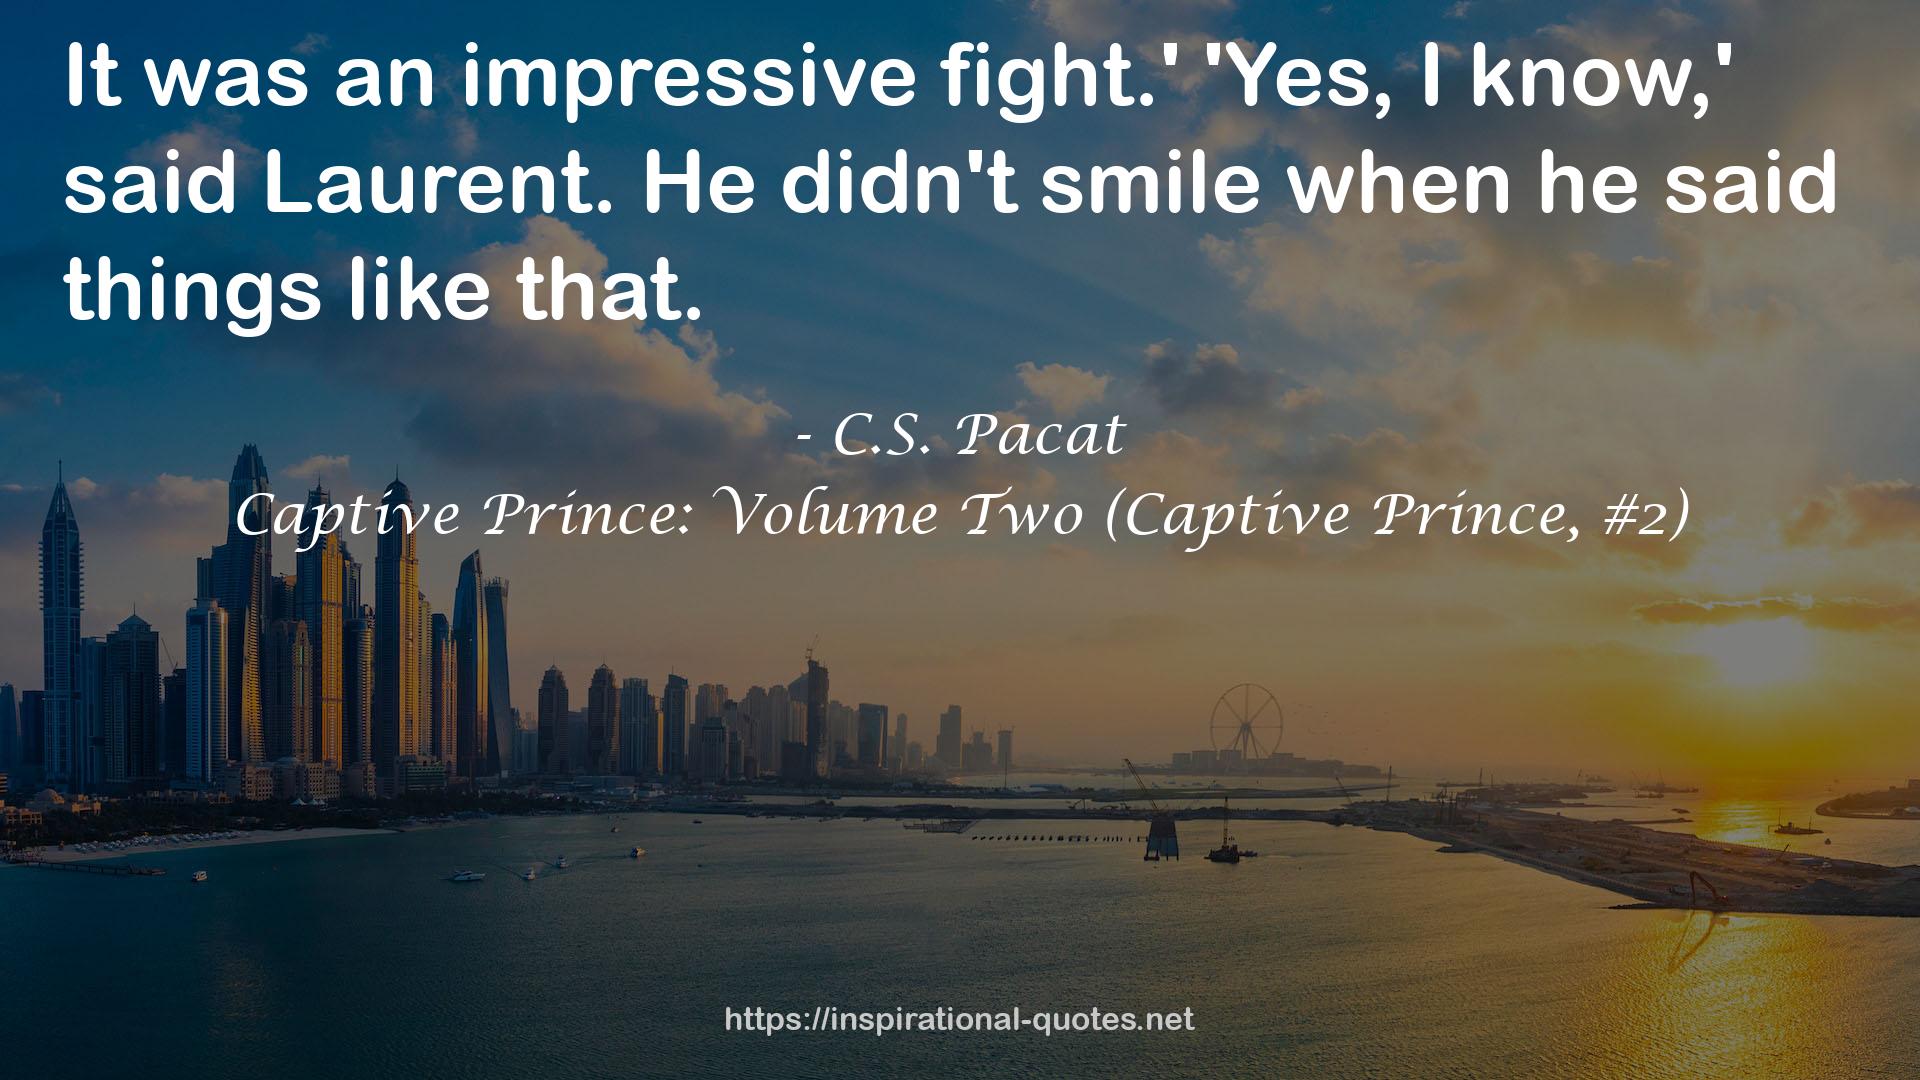 Captive Prince: Volume Two (Captive Prince, #2) QUOTES